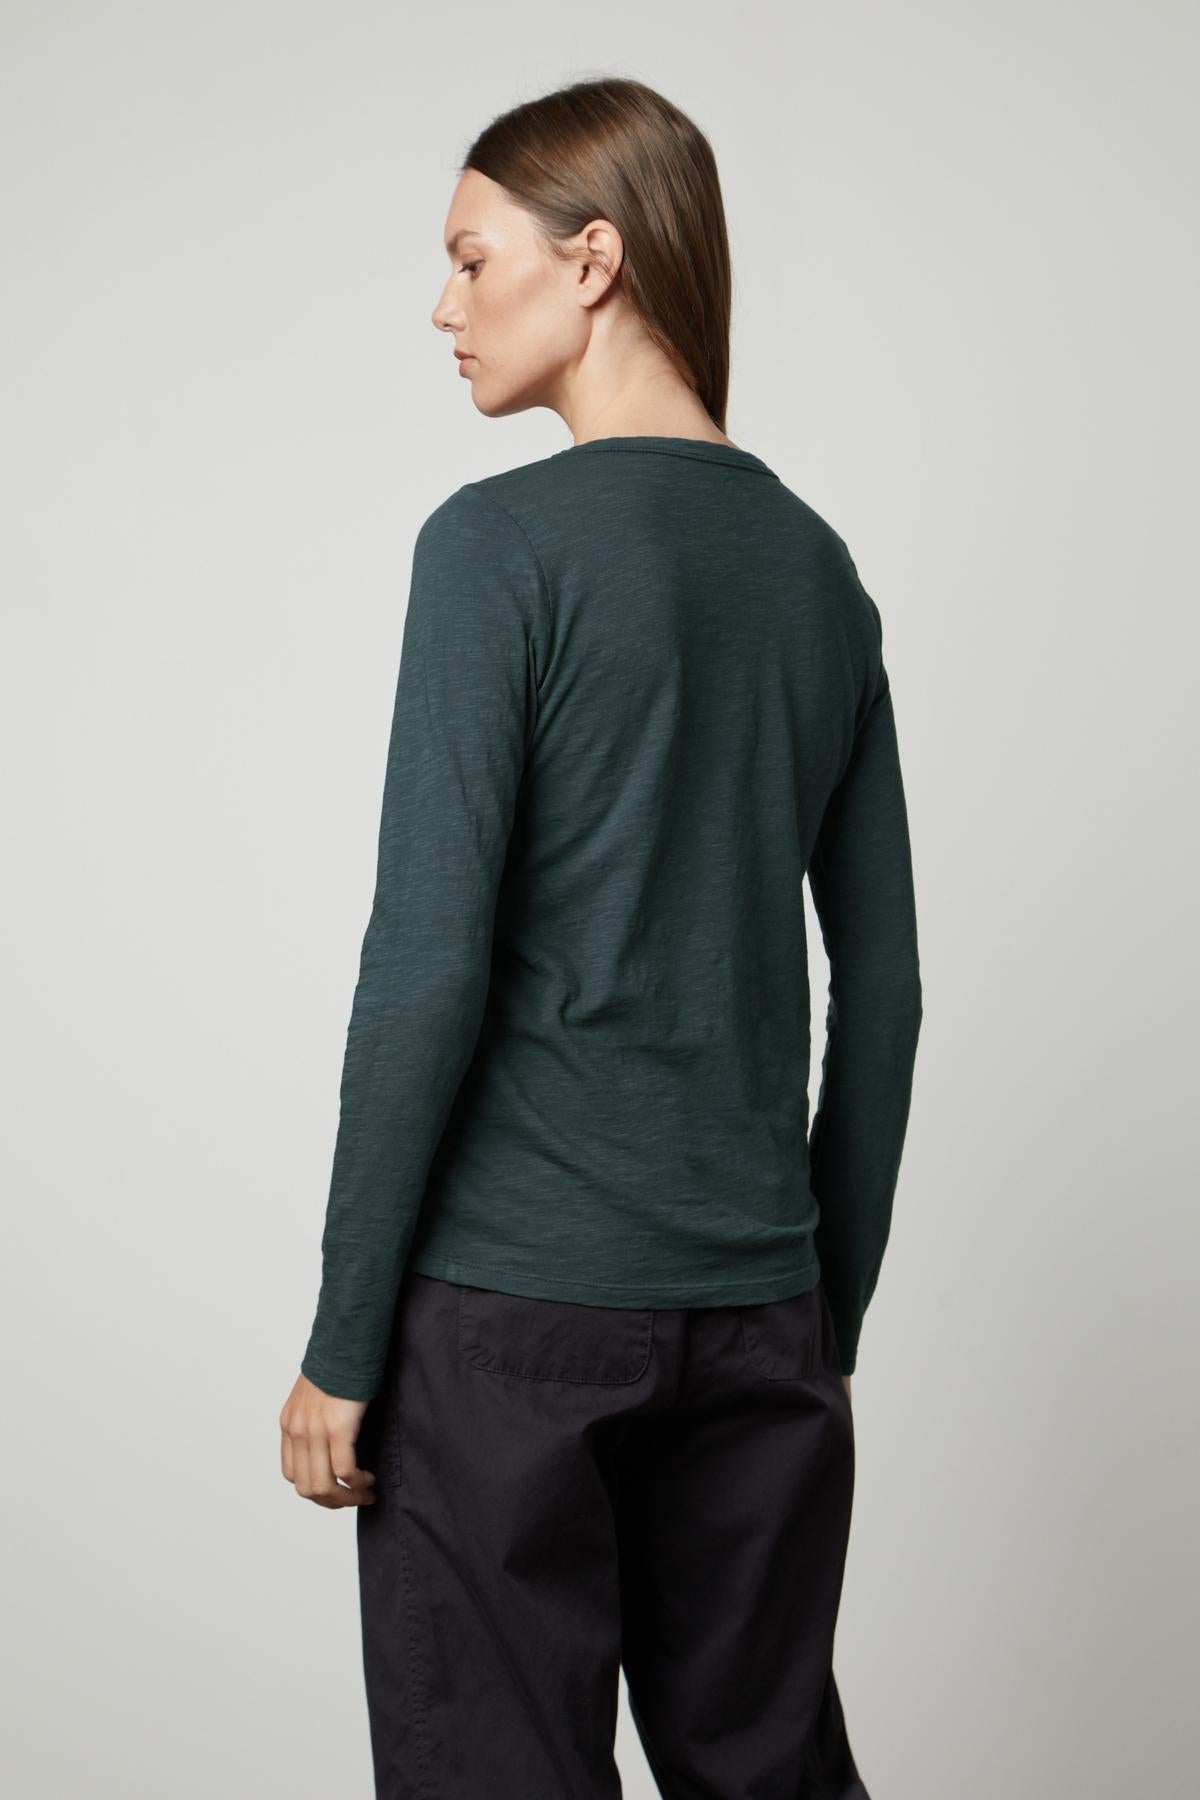   The view of a woman wearing a LIZZIE ORIGINAL SLUB LONG SLEEVE TEE by Velvet by Graham & Spencer from the back. 